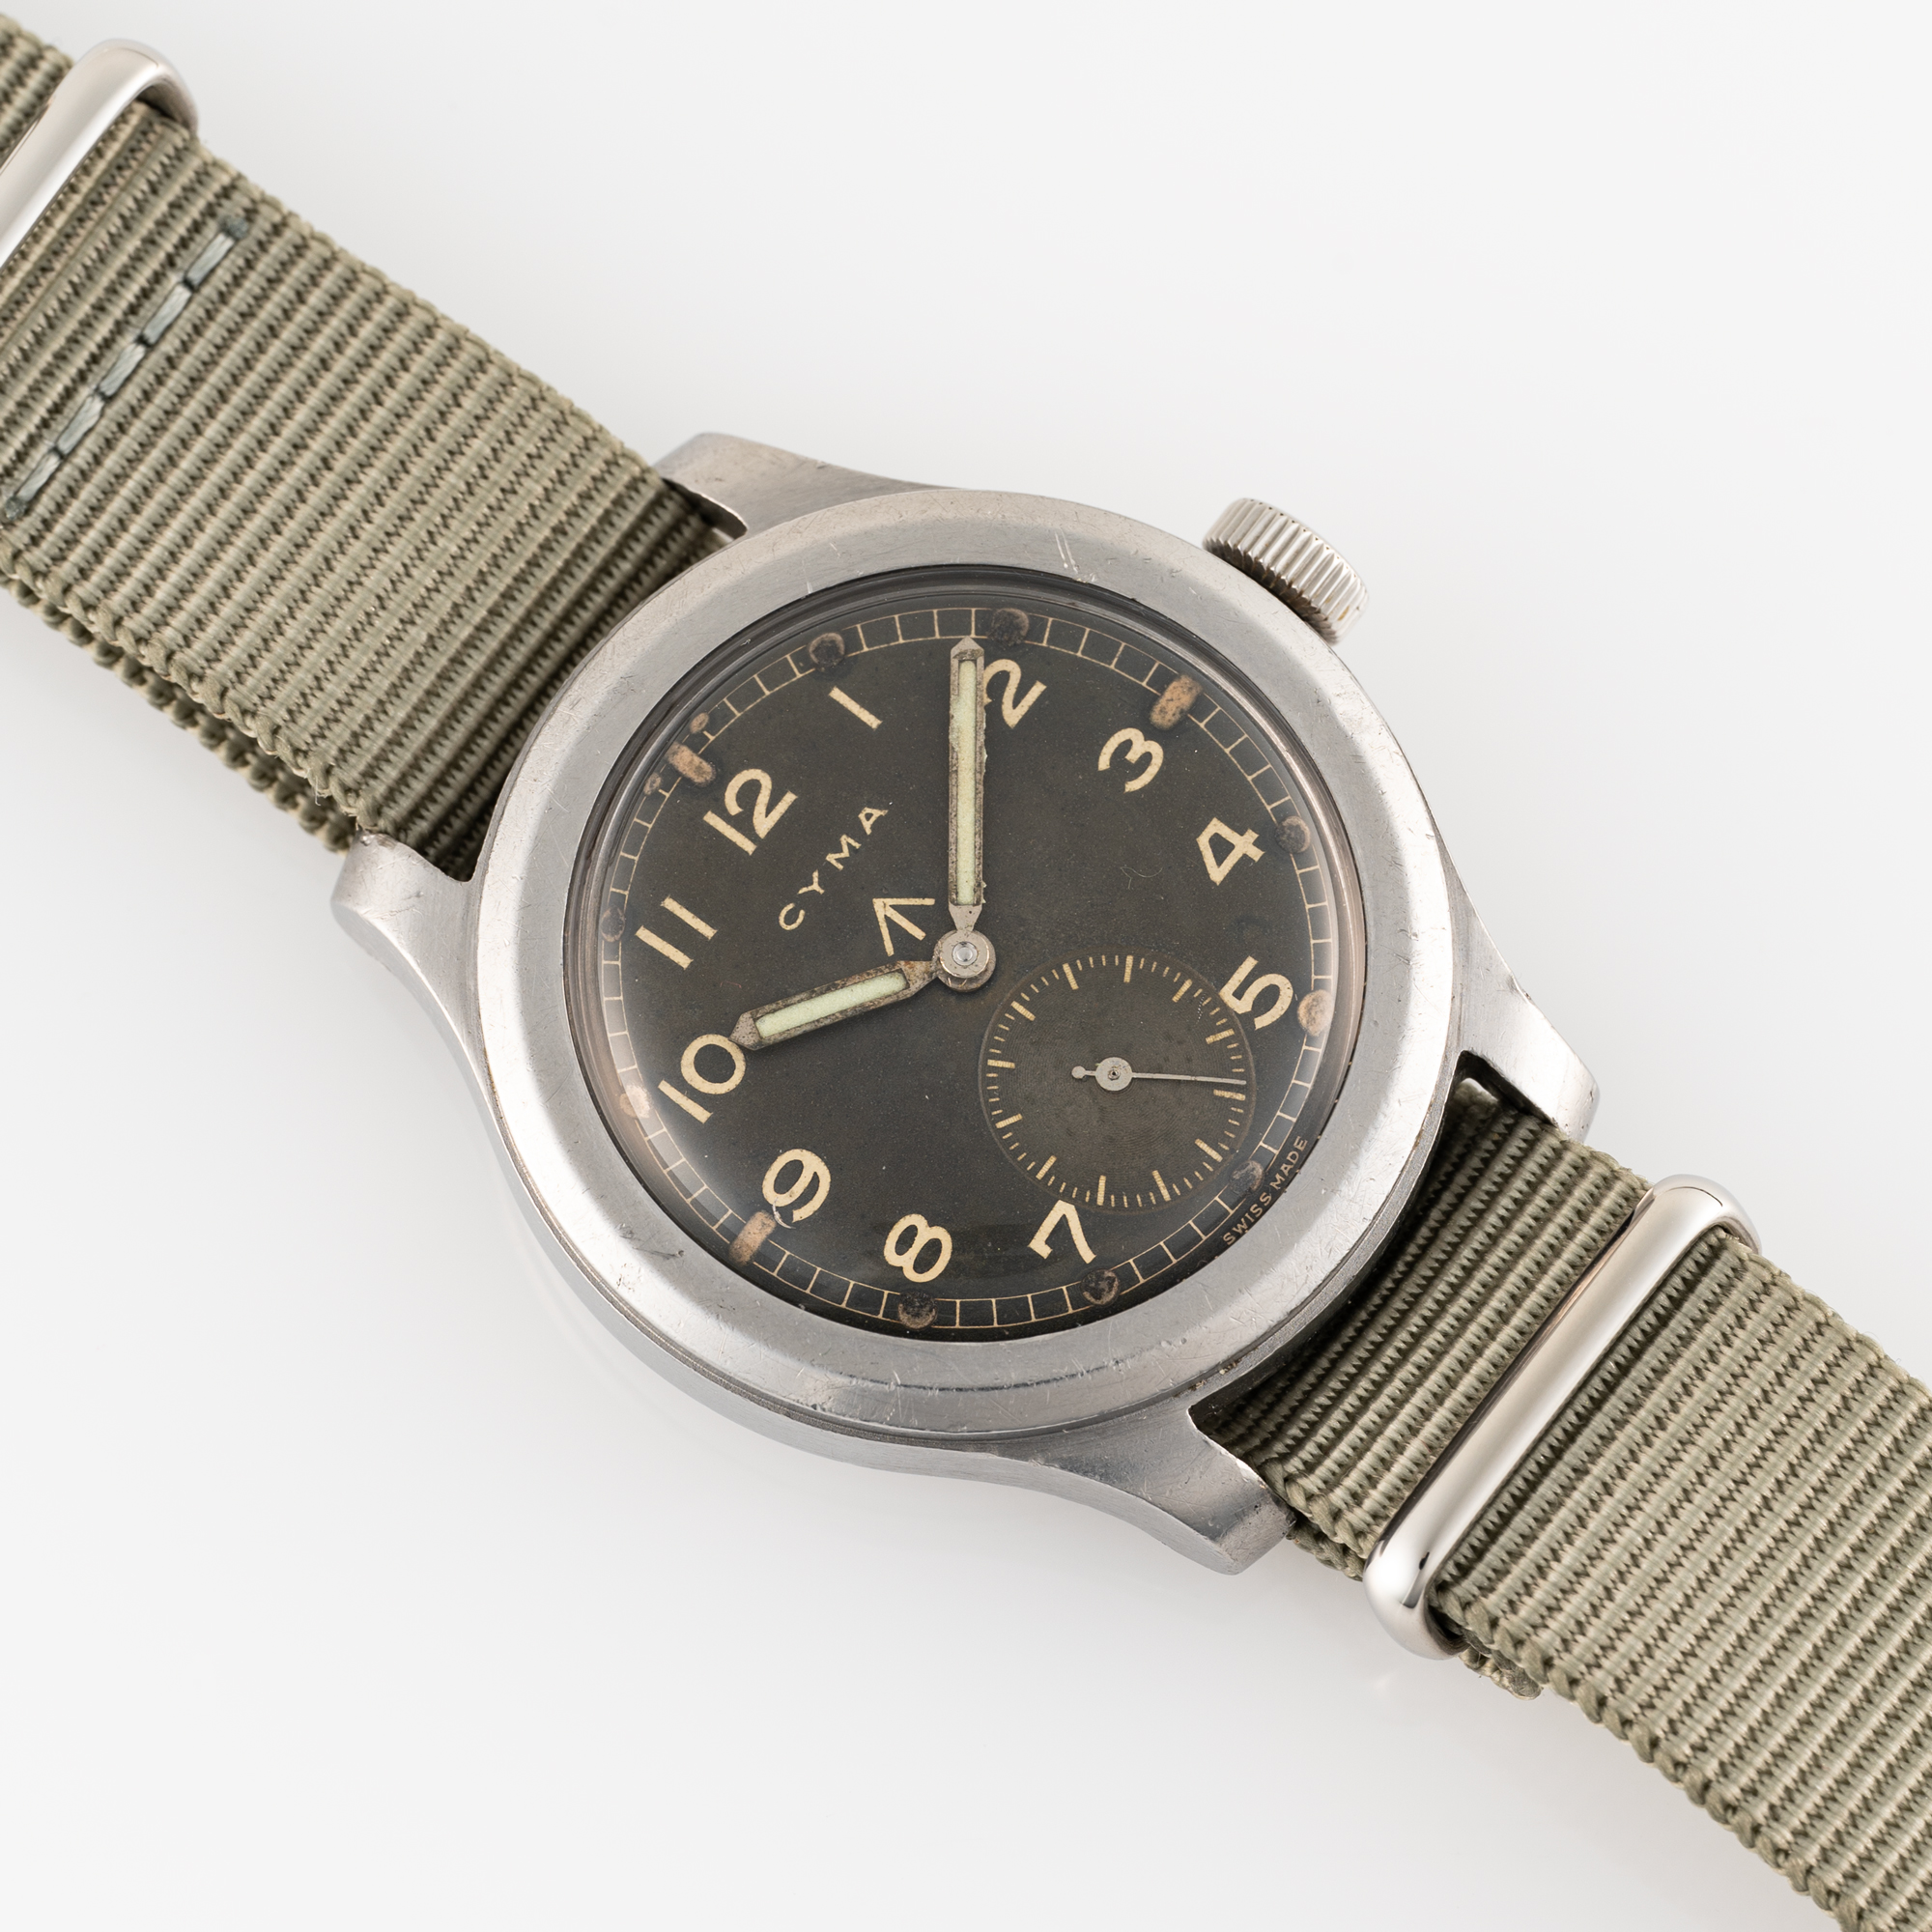 A GENTLEMAN'S STAINLESS STEEL BRITISH MILITARY CYMA W.W.W. WRIST WATCH CIRCA 1945, PART OF THE " - Image 4 of 8